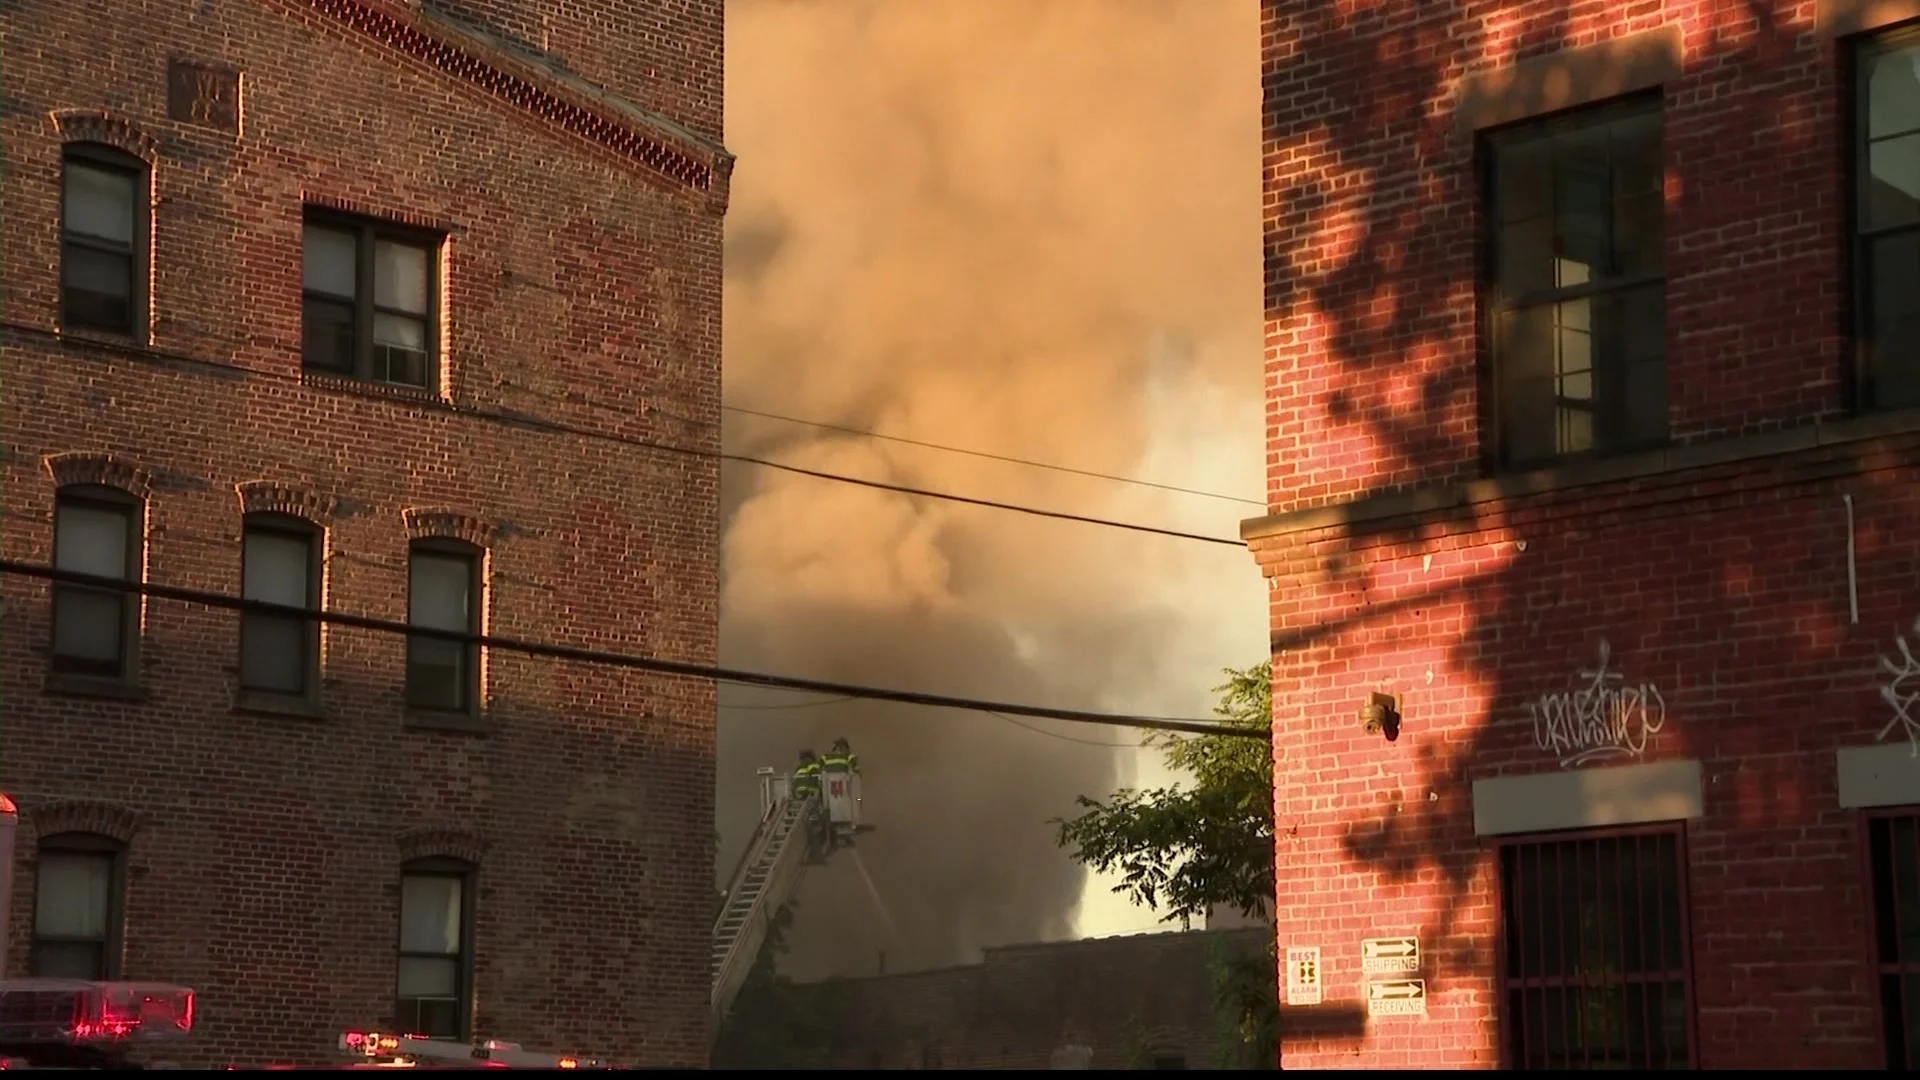 FDNY: 4 firefighters hospitalized after massive fire in Port Morris